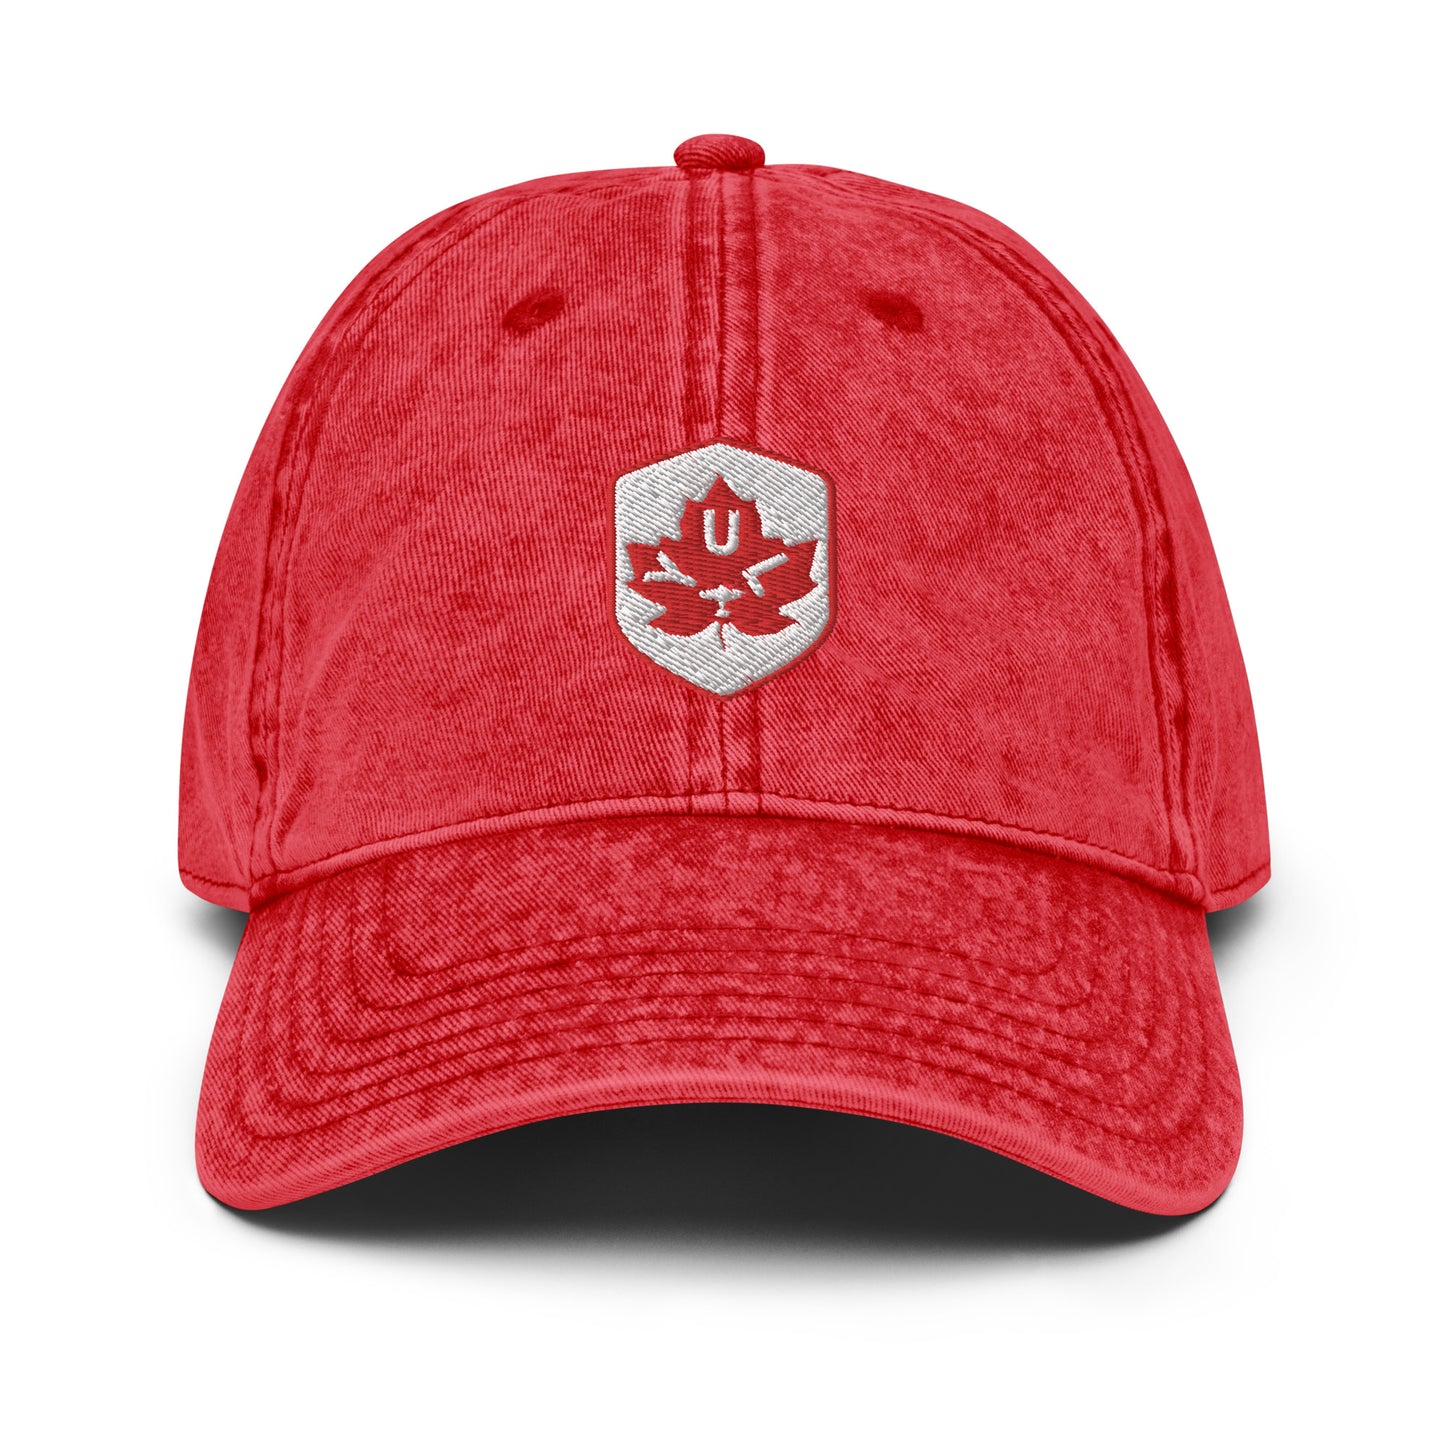 Maple Leaf Twill Cap - Red/White • YUL Montreal • YHM Designs - Image 19